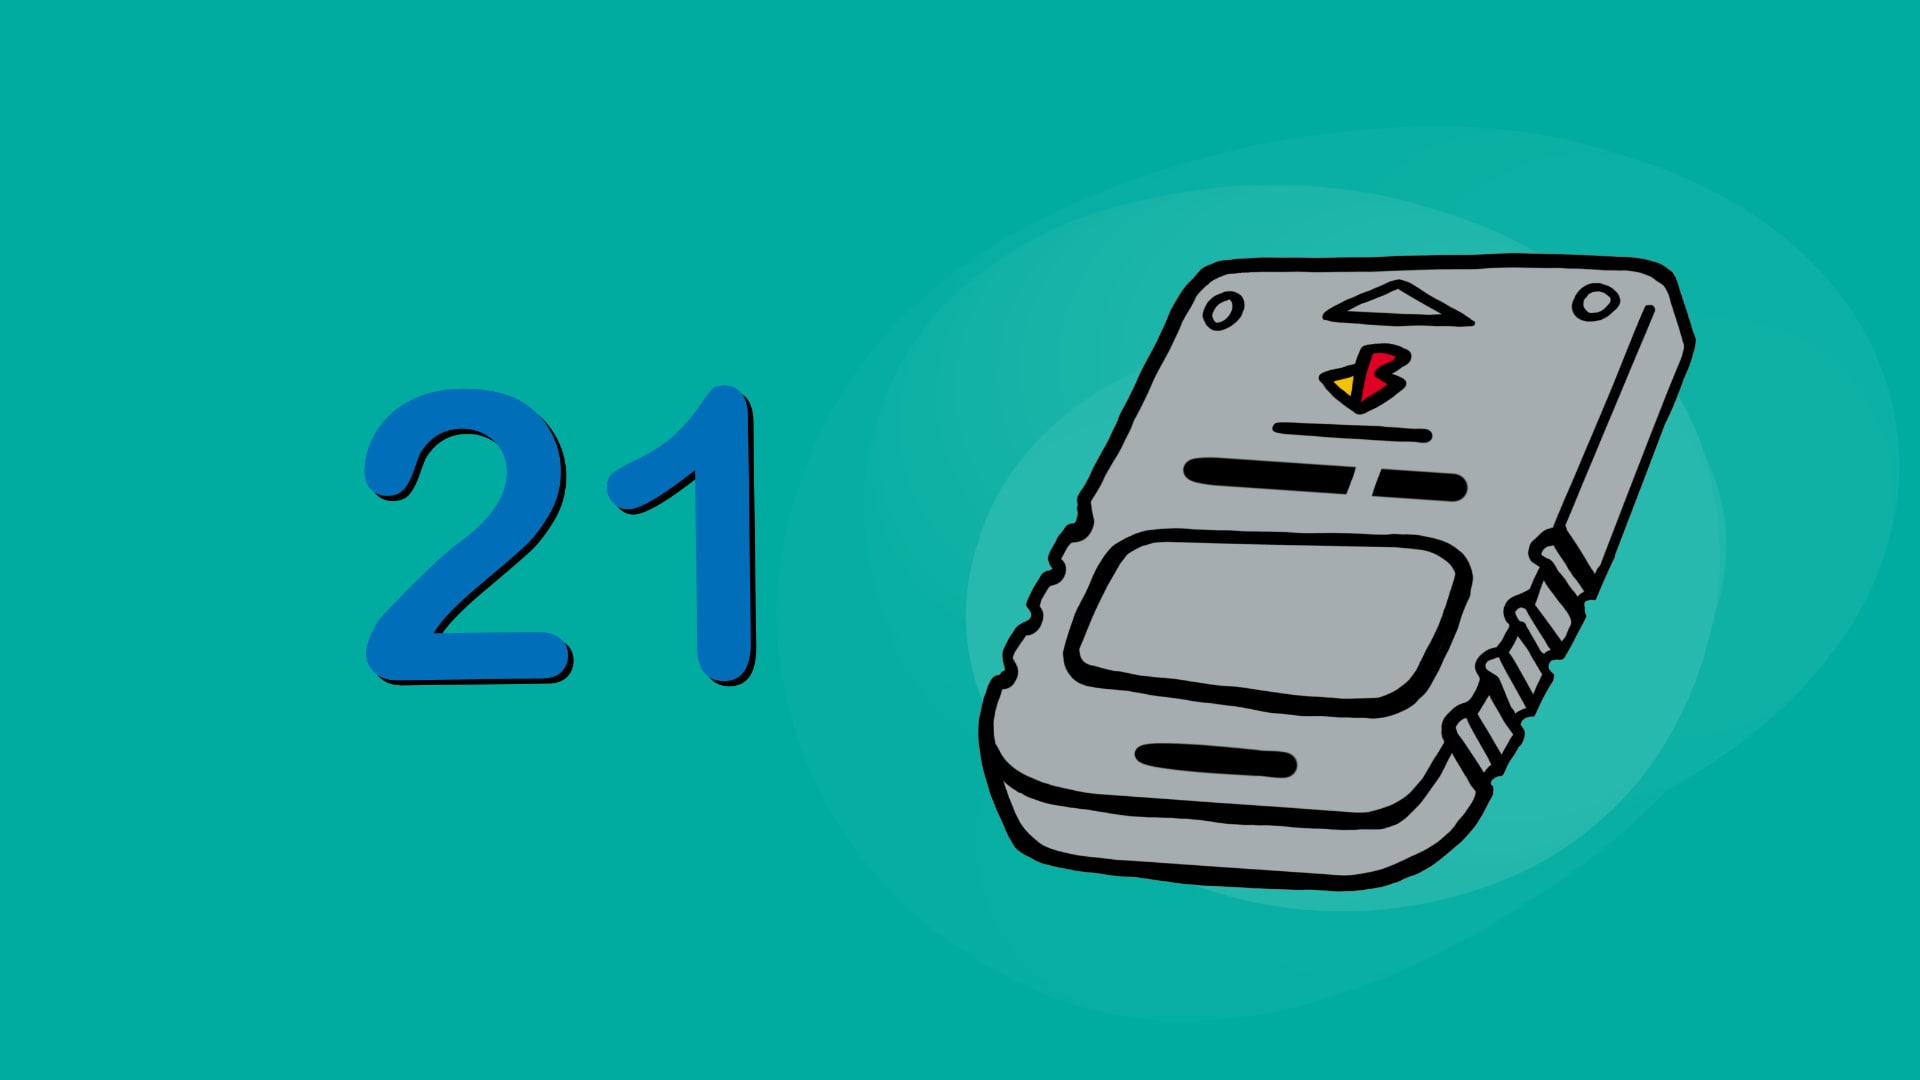 A doodle of a PlayStation Memory Card with the number 21 on the left.